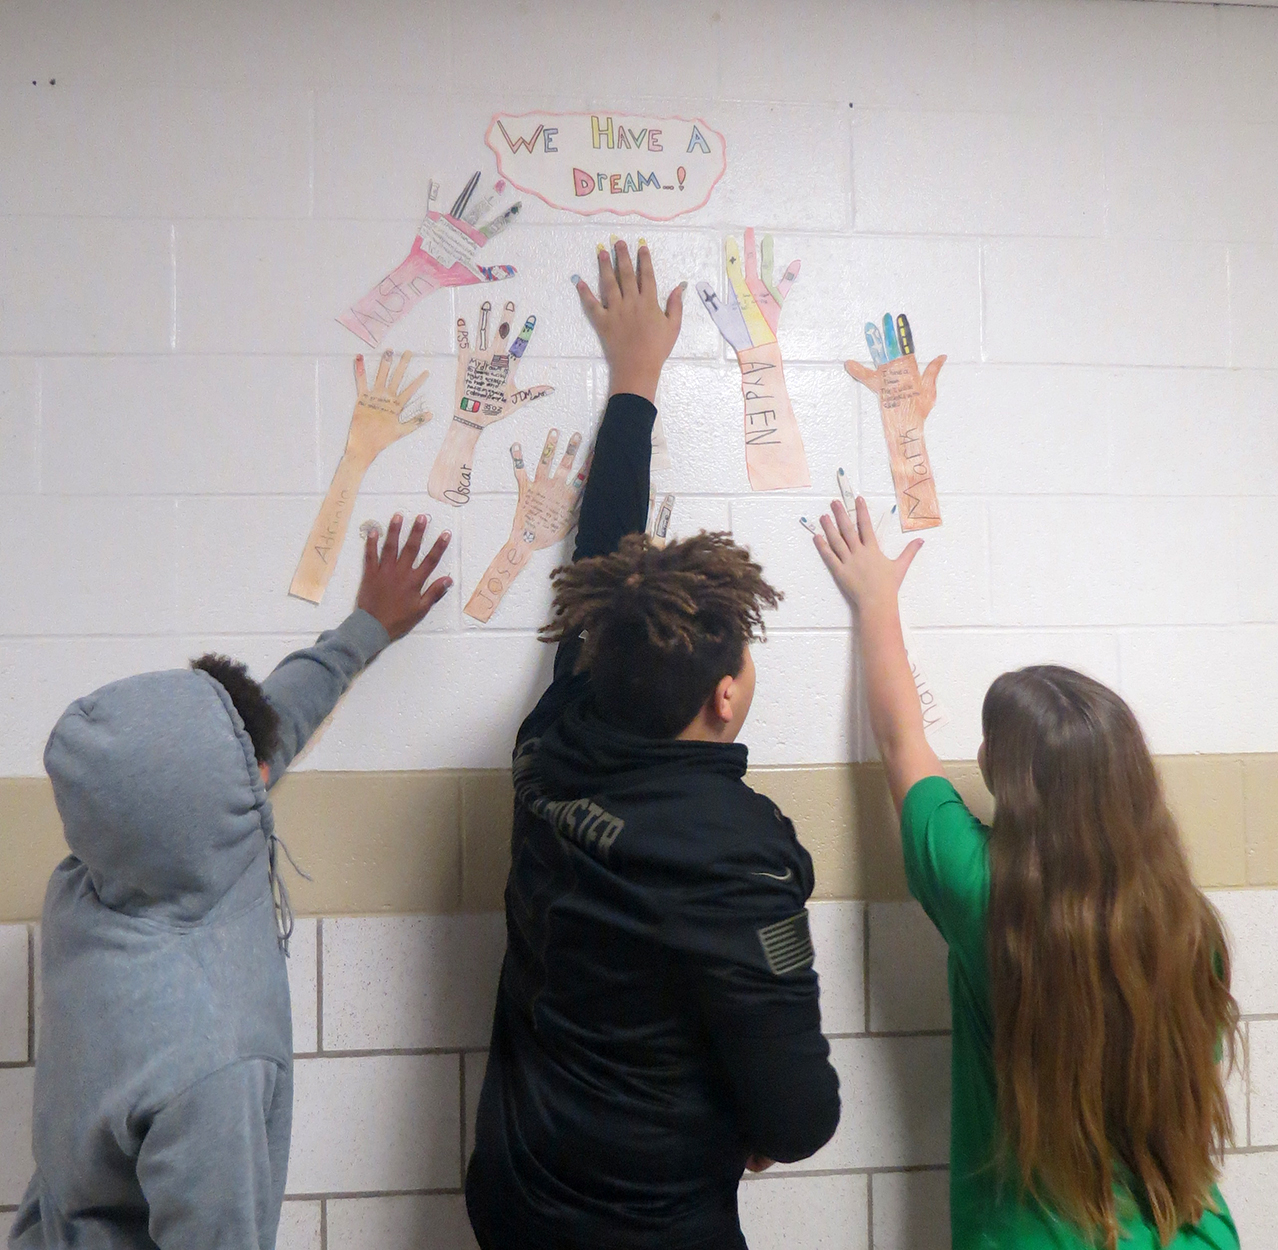 Wall of art - 3 students reach up to put their hands next to tracings of hands with drawings inside.